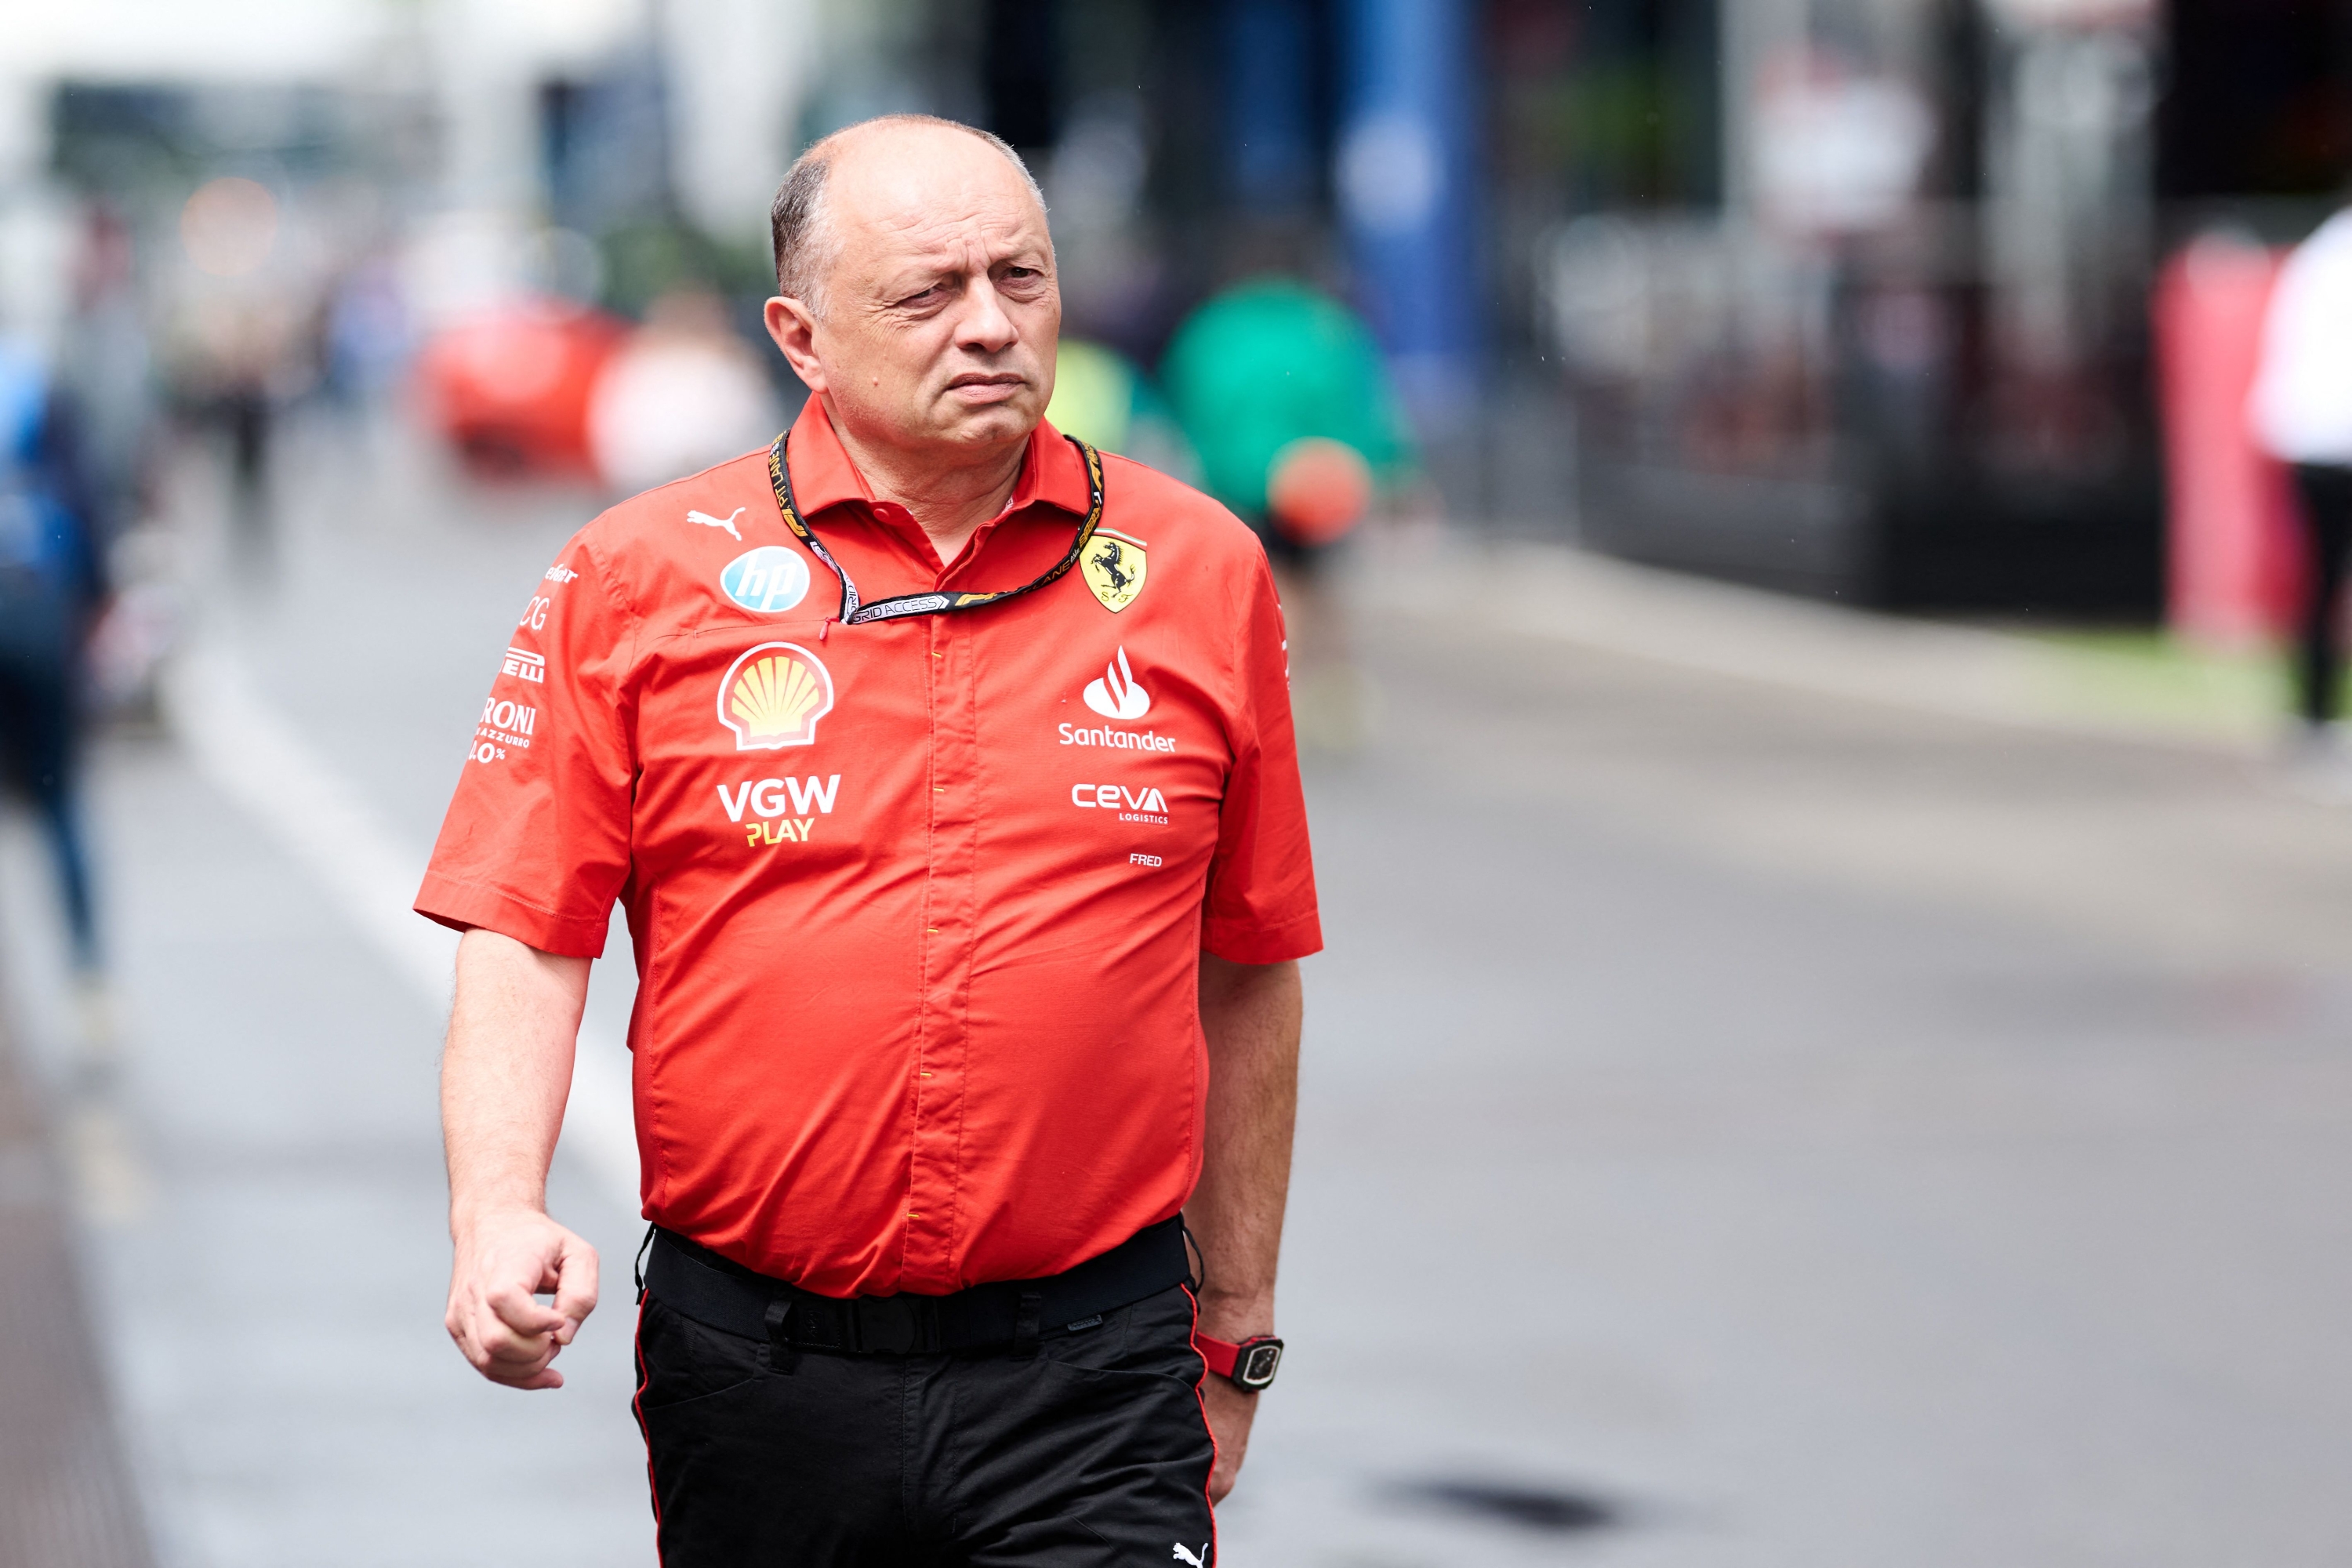 Scuderia Ferrari's team principal and general manager Frederic Vasseur arrives on the Red Bull Ring race track in Spielberg, Austria, on June 27, 2024, ahead of the Formula One Austrian Grand Prix. (Photo by MAX SLOVENCIK / APA / AFP) / Austria OUT